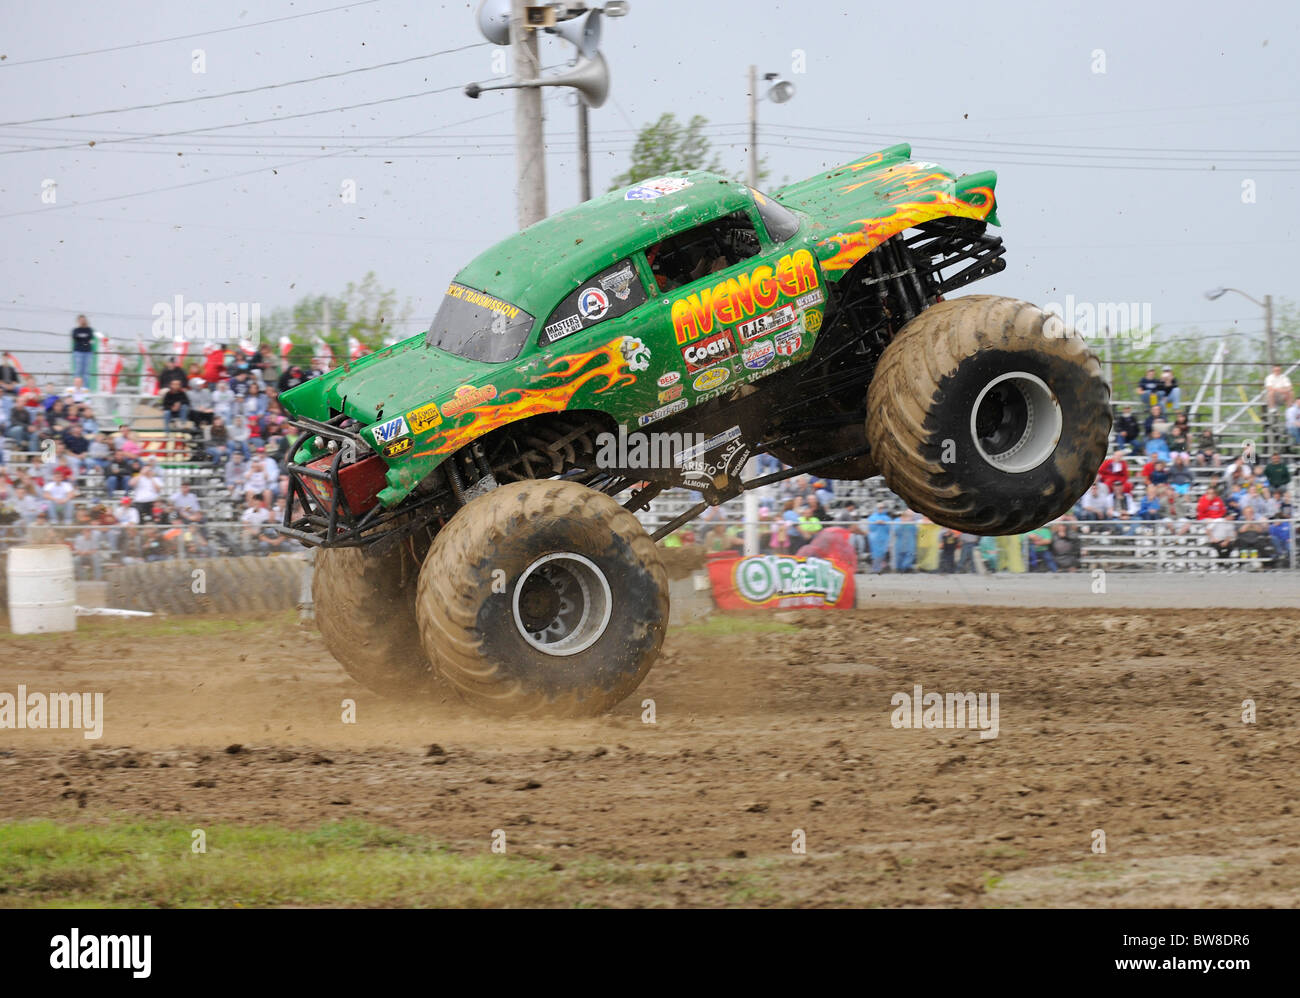 Monster Truck Avenger at freestyle competition at 4x4 Off-Road Jamboree  Monster Truck Show at Lima, Ohio Stock Photo - Alamy